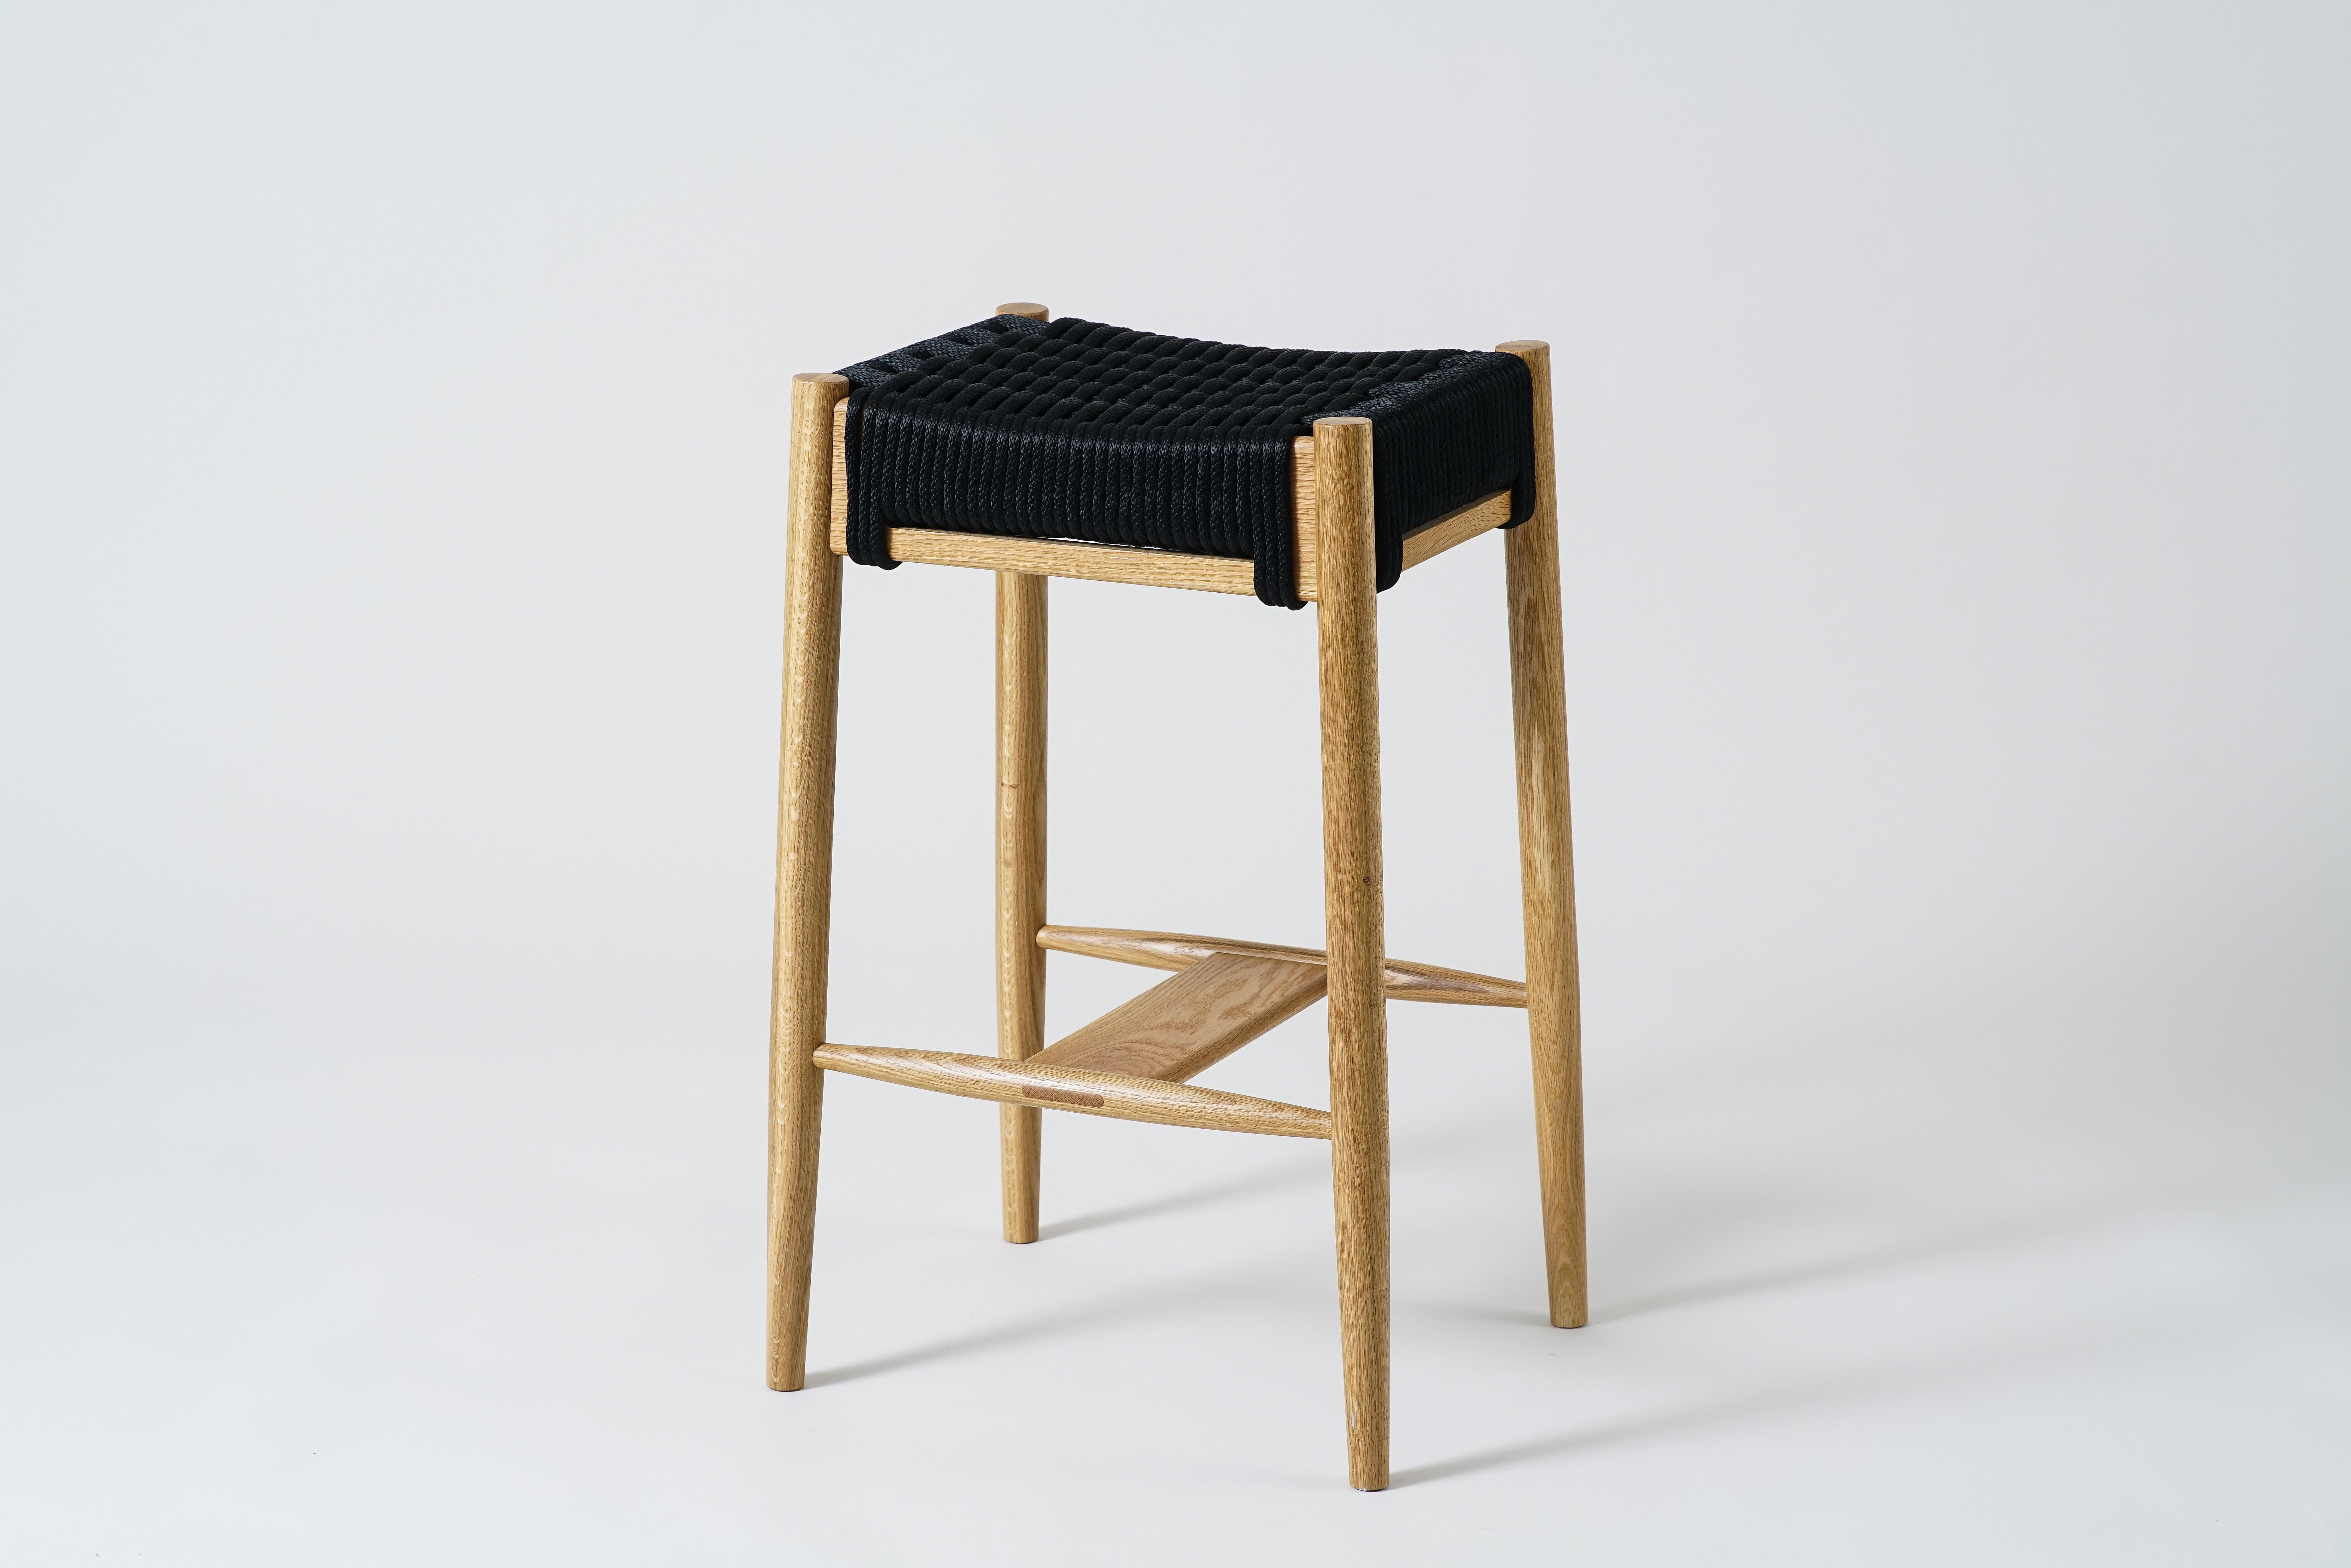 The Bay Bar Stool is a solid wood stool with a roomy seat and turned tapered legs. Wood frames available in walnut, white oak, maple, and black. Available with a rope woven seat (shown here). The sturdy, but graceful footrest has an exposed tenon